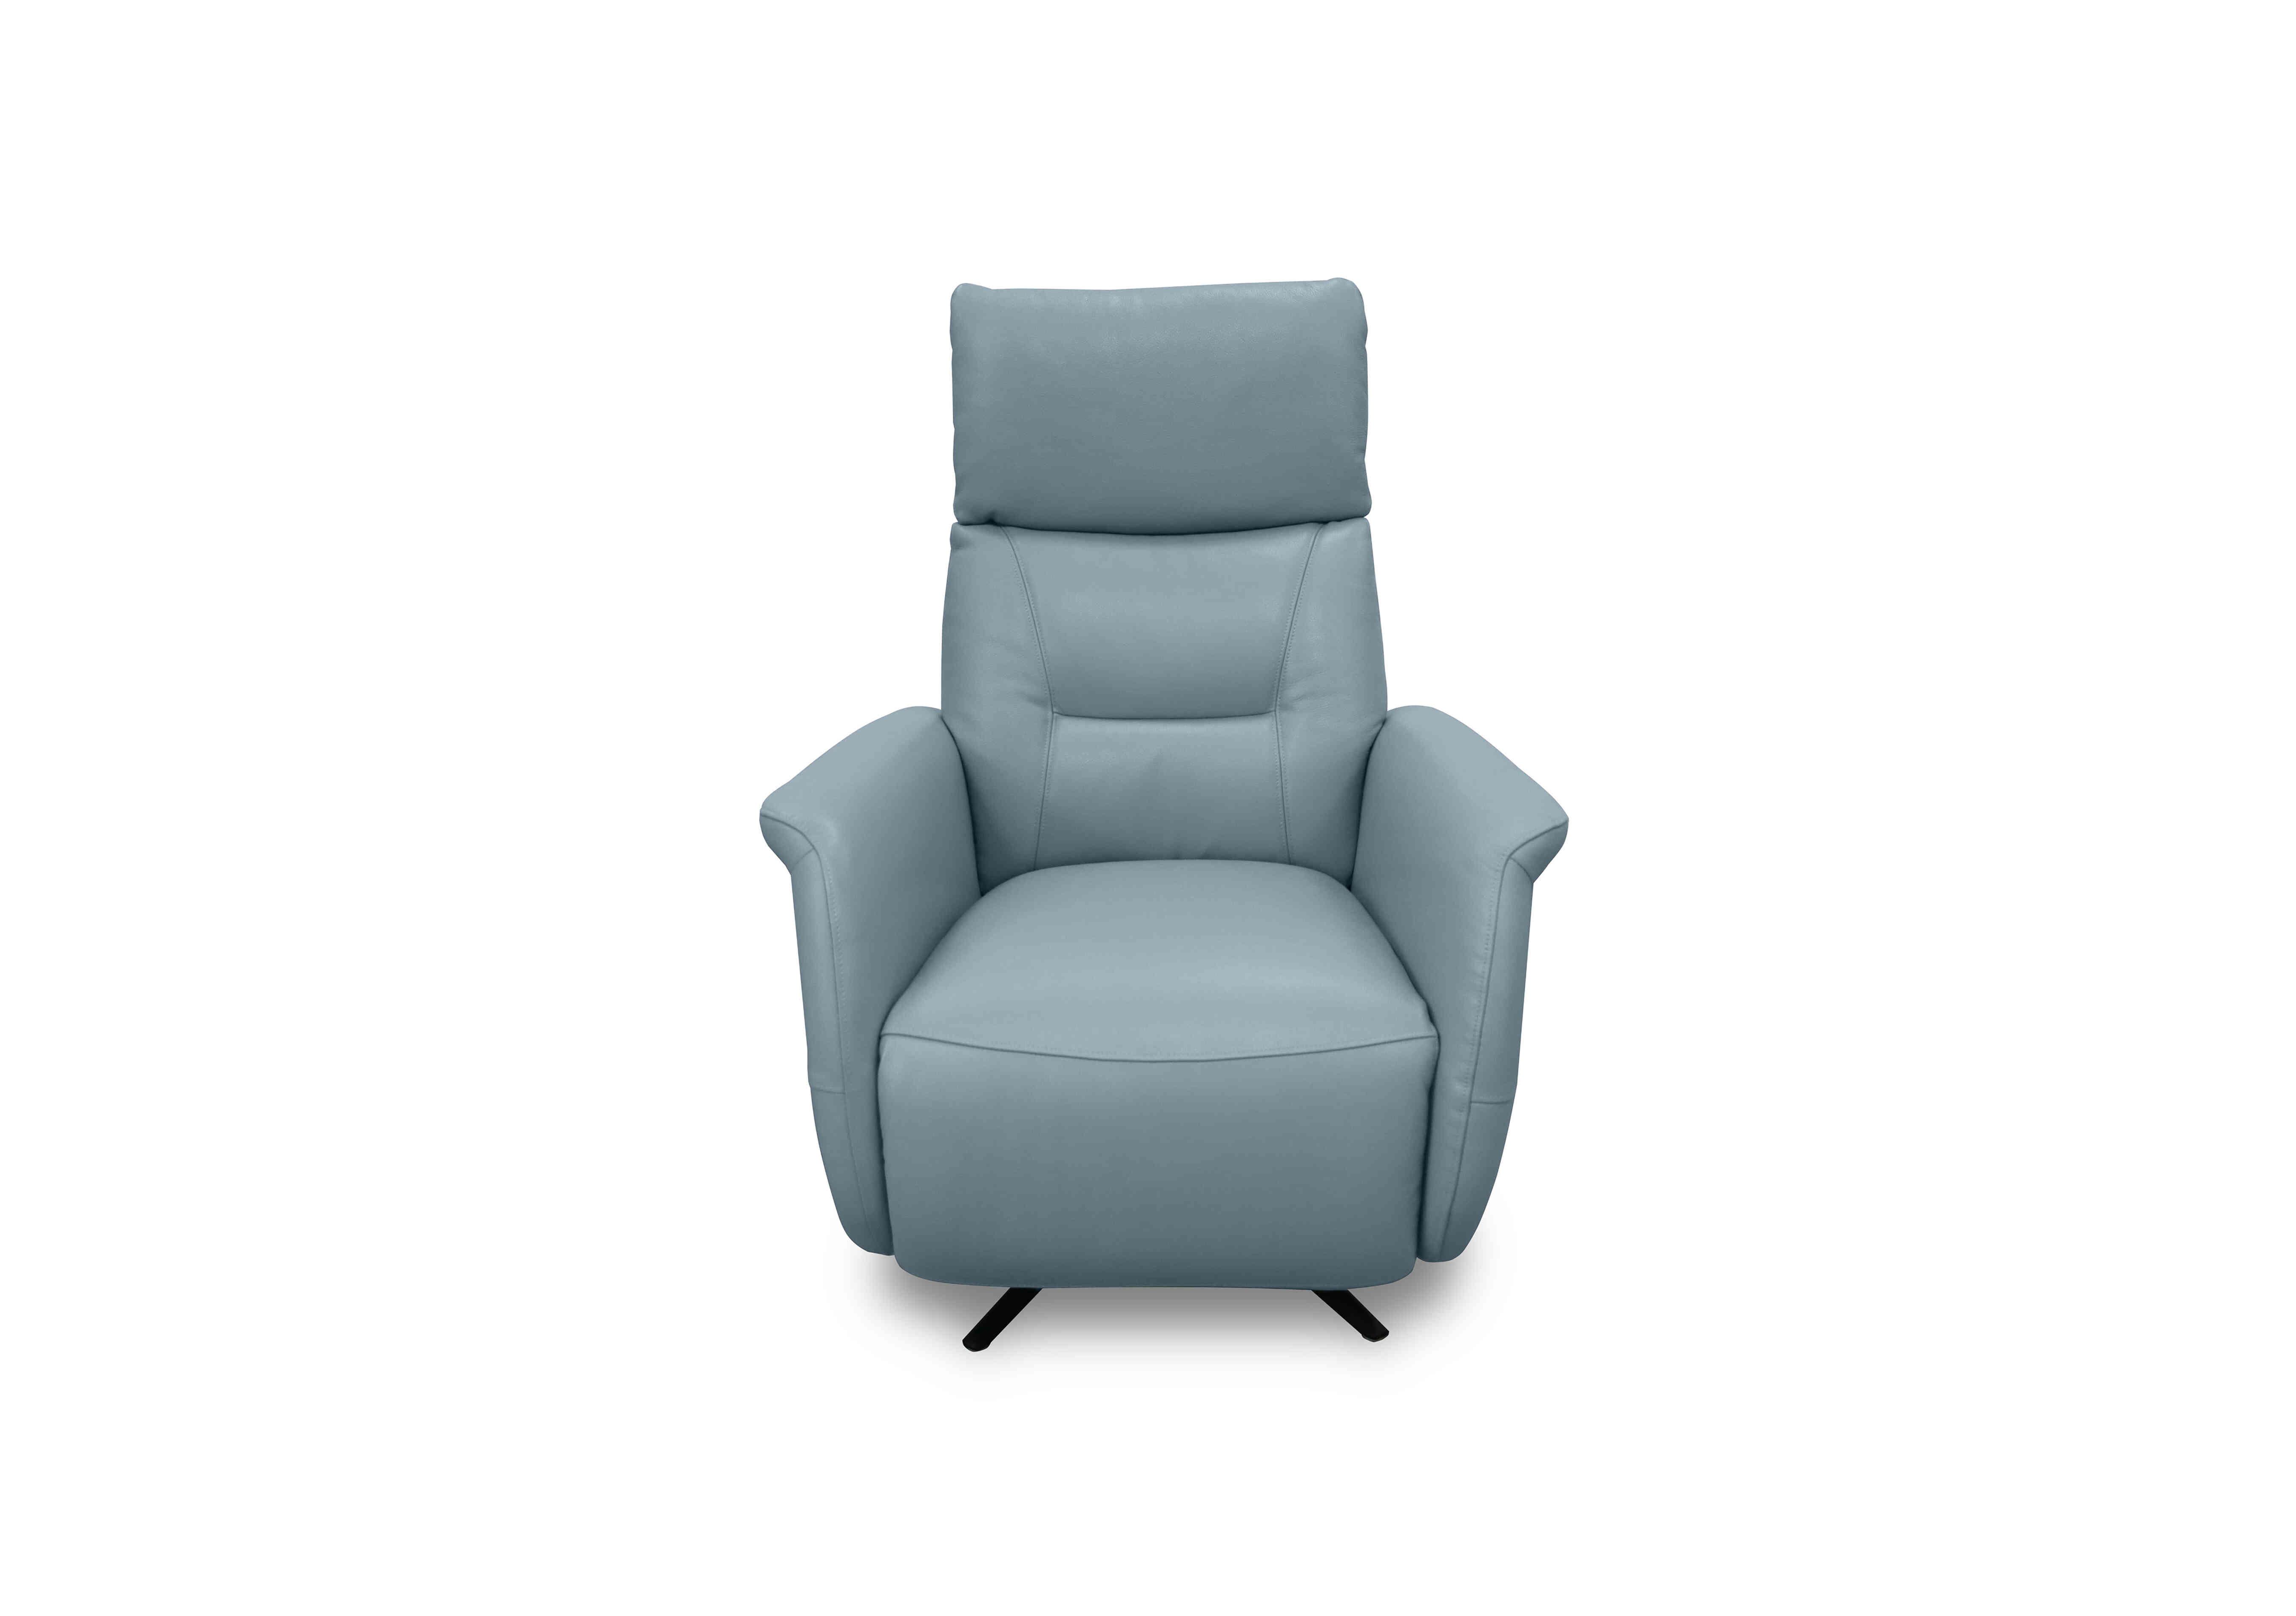 Designer Chair Collection Dusseldorf Leather Power Recliner Swivel Chair in Nc-026e Pearl Blue on Furniture Village